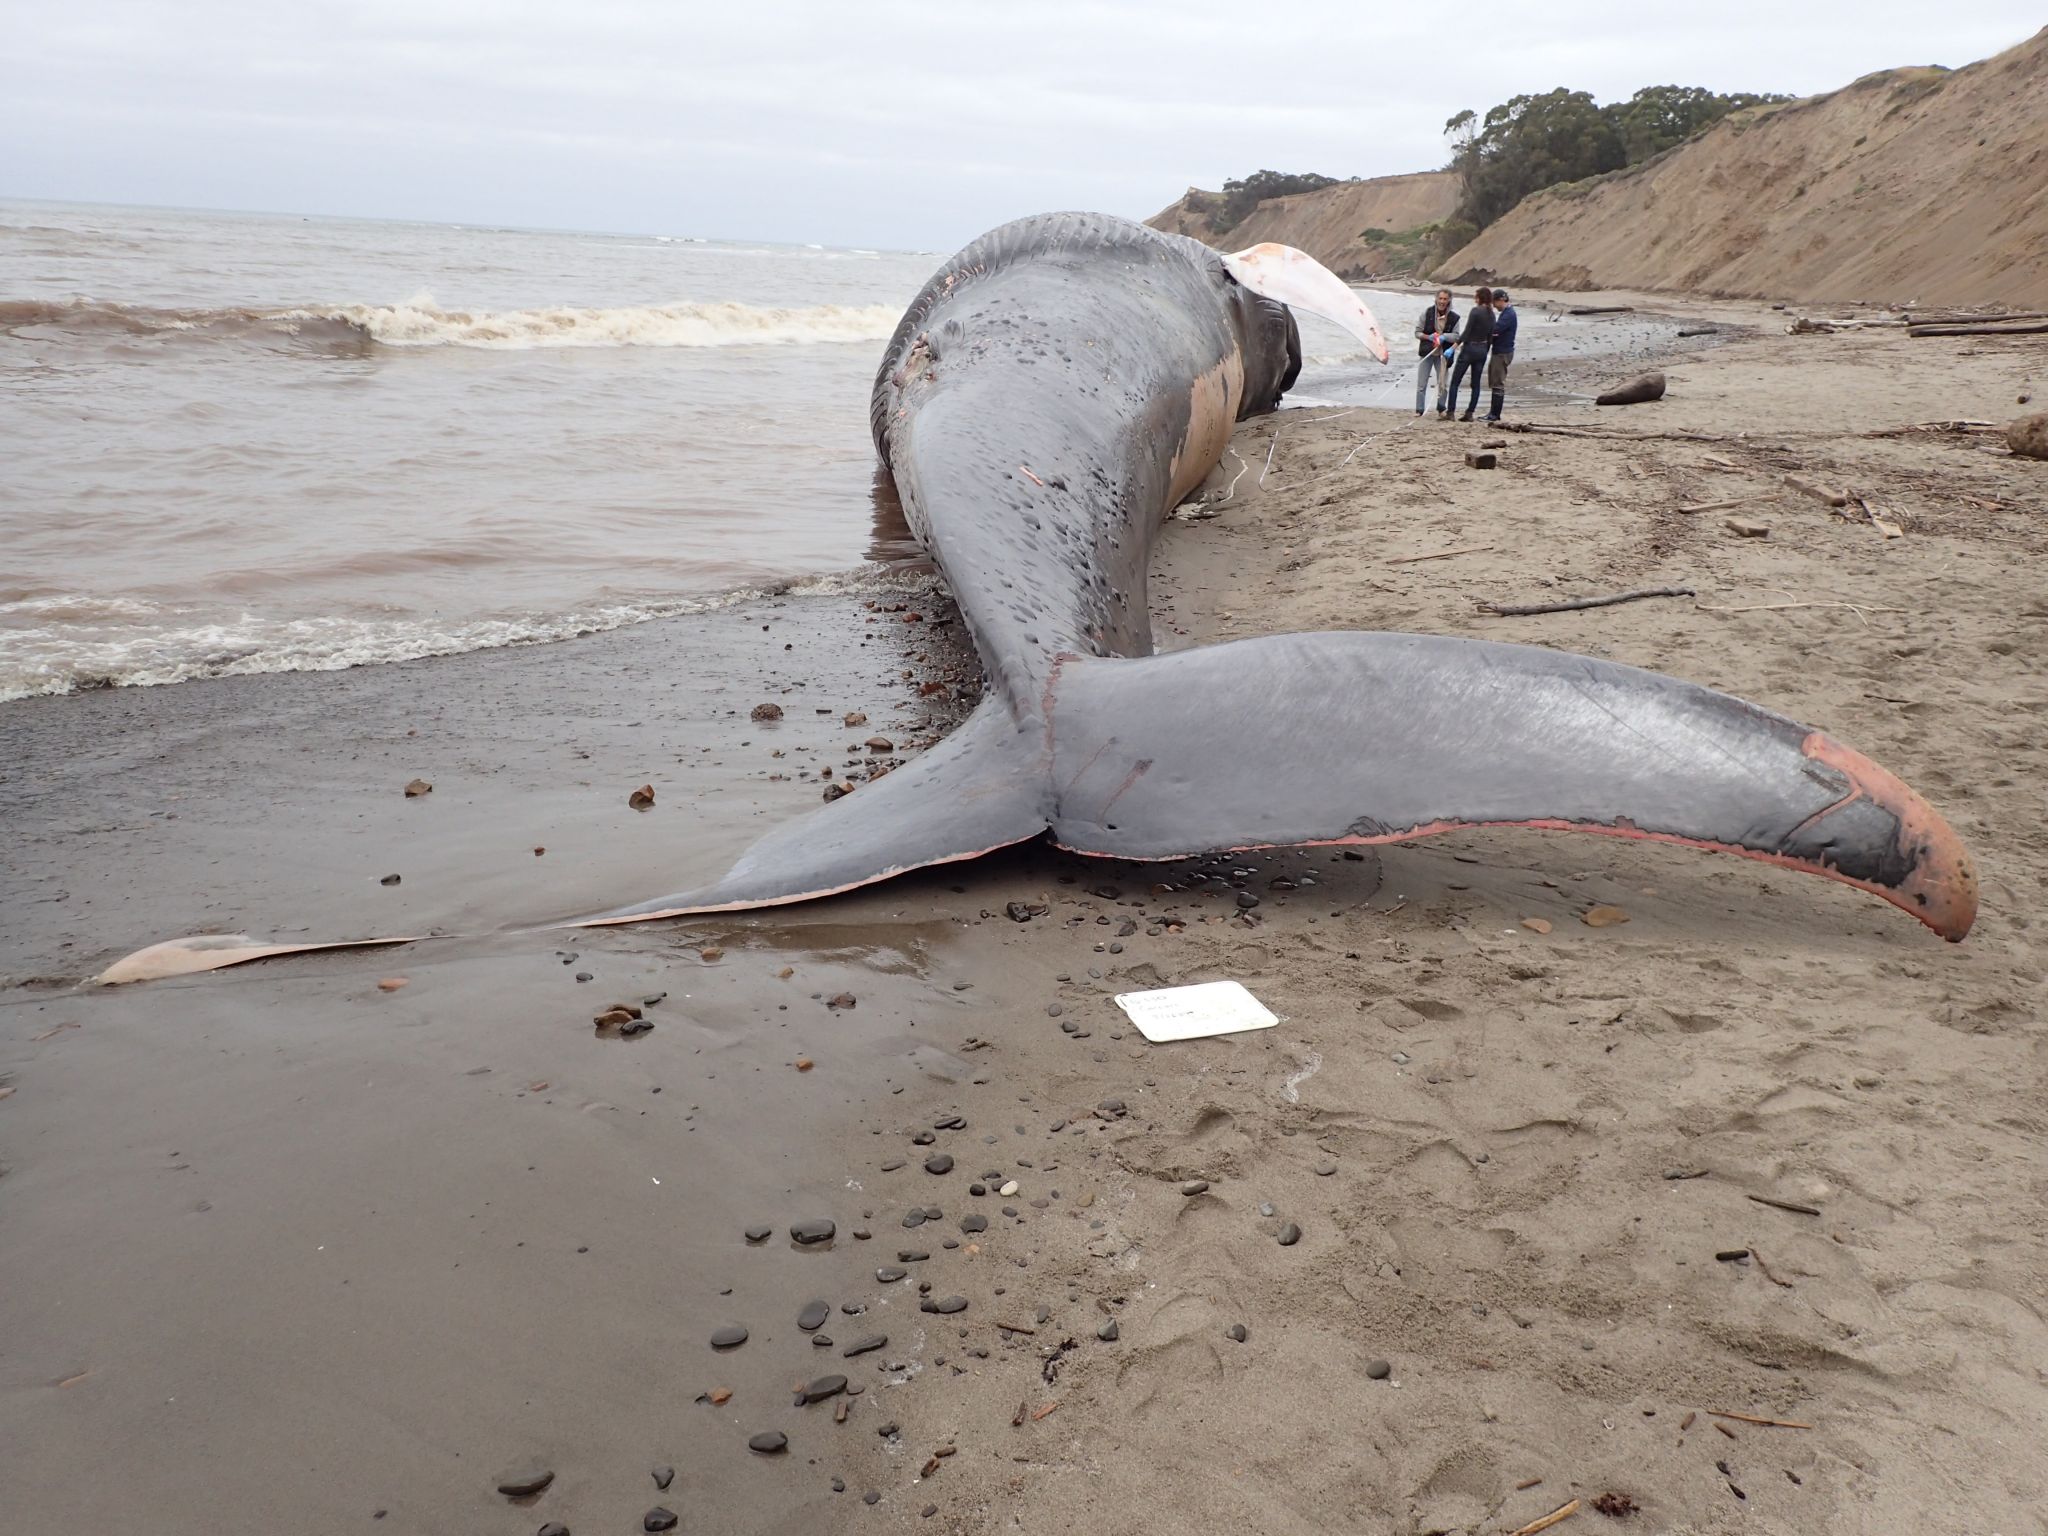 Blue whale found beached in Bolinas died from collision with ship.